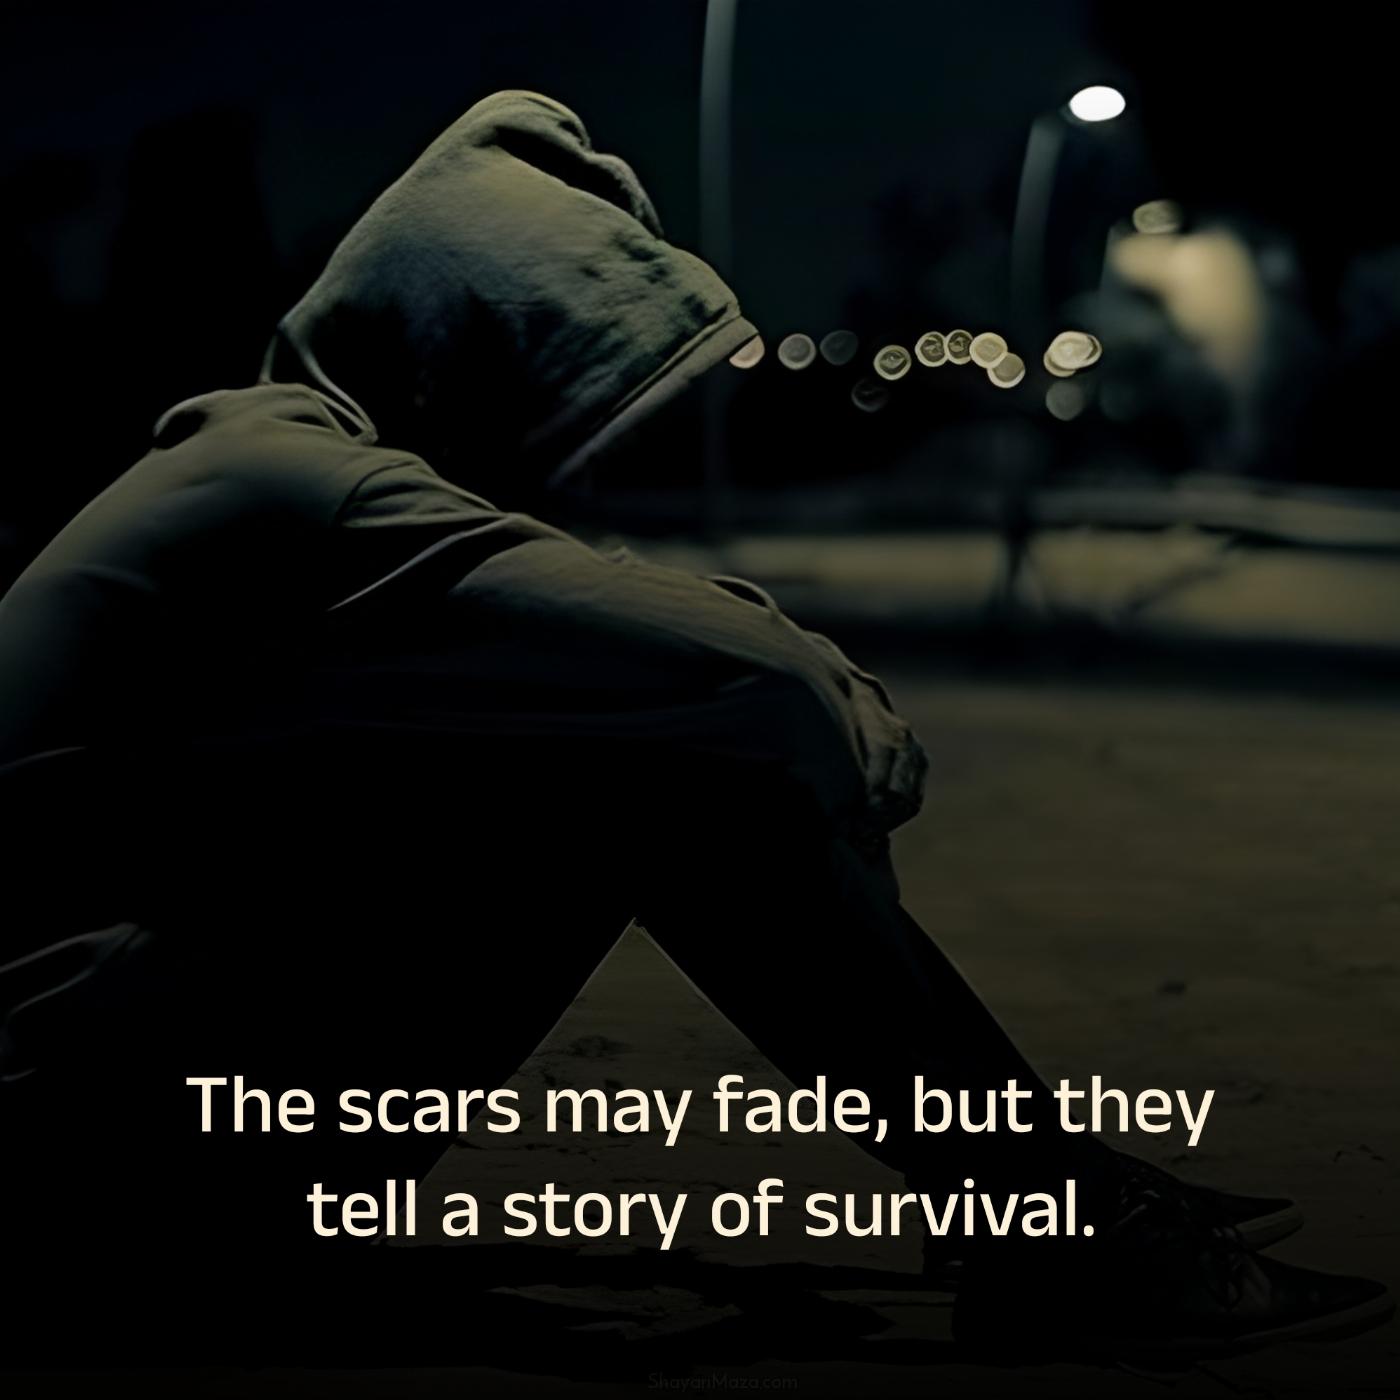 The scars may fade but they tell a story of survival